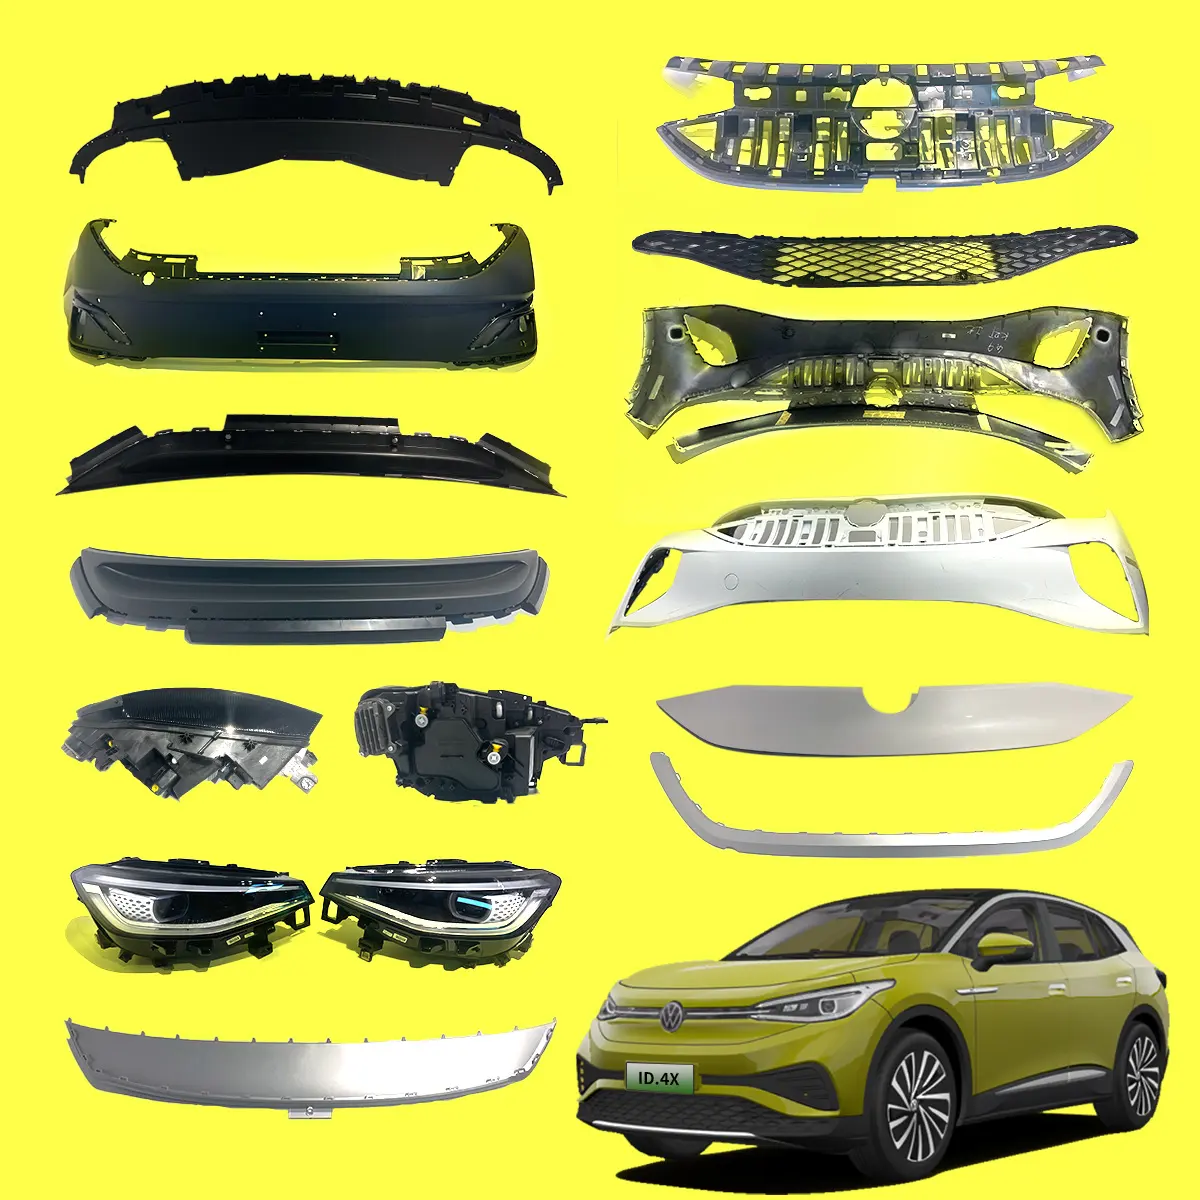 ID4 ID6 VW Car BodyAccessories For New Energy Vehicle Spare auto Parts Car